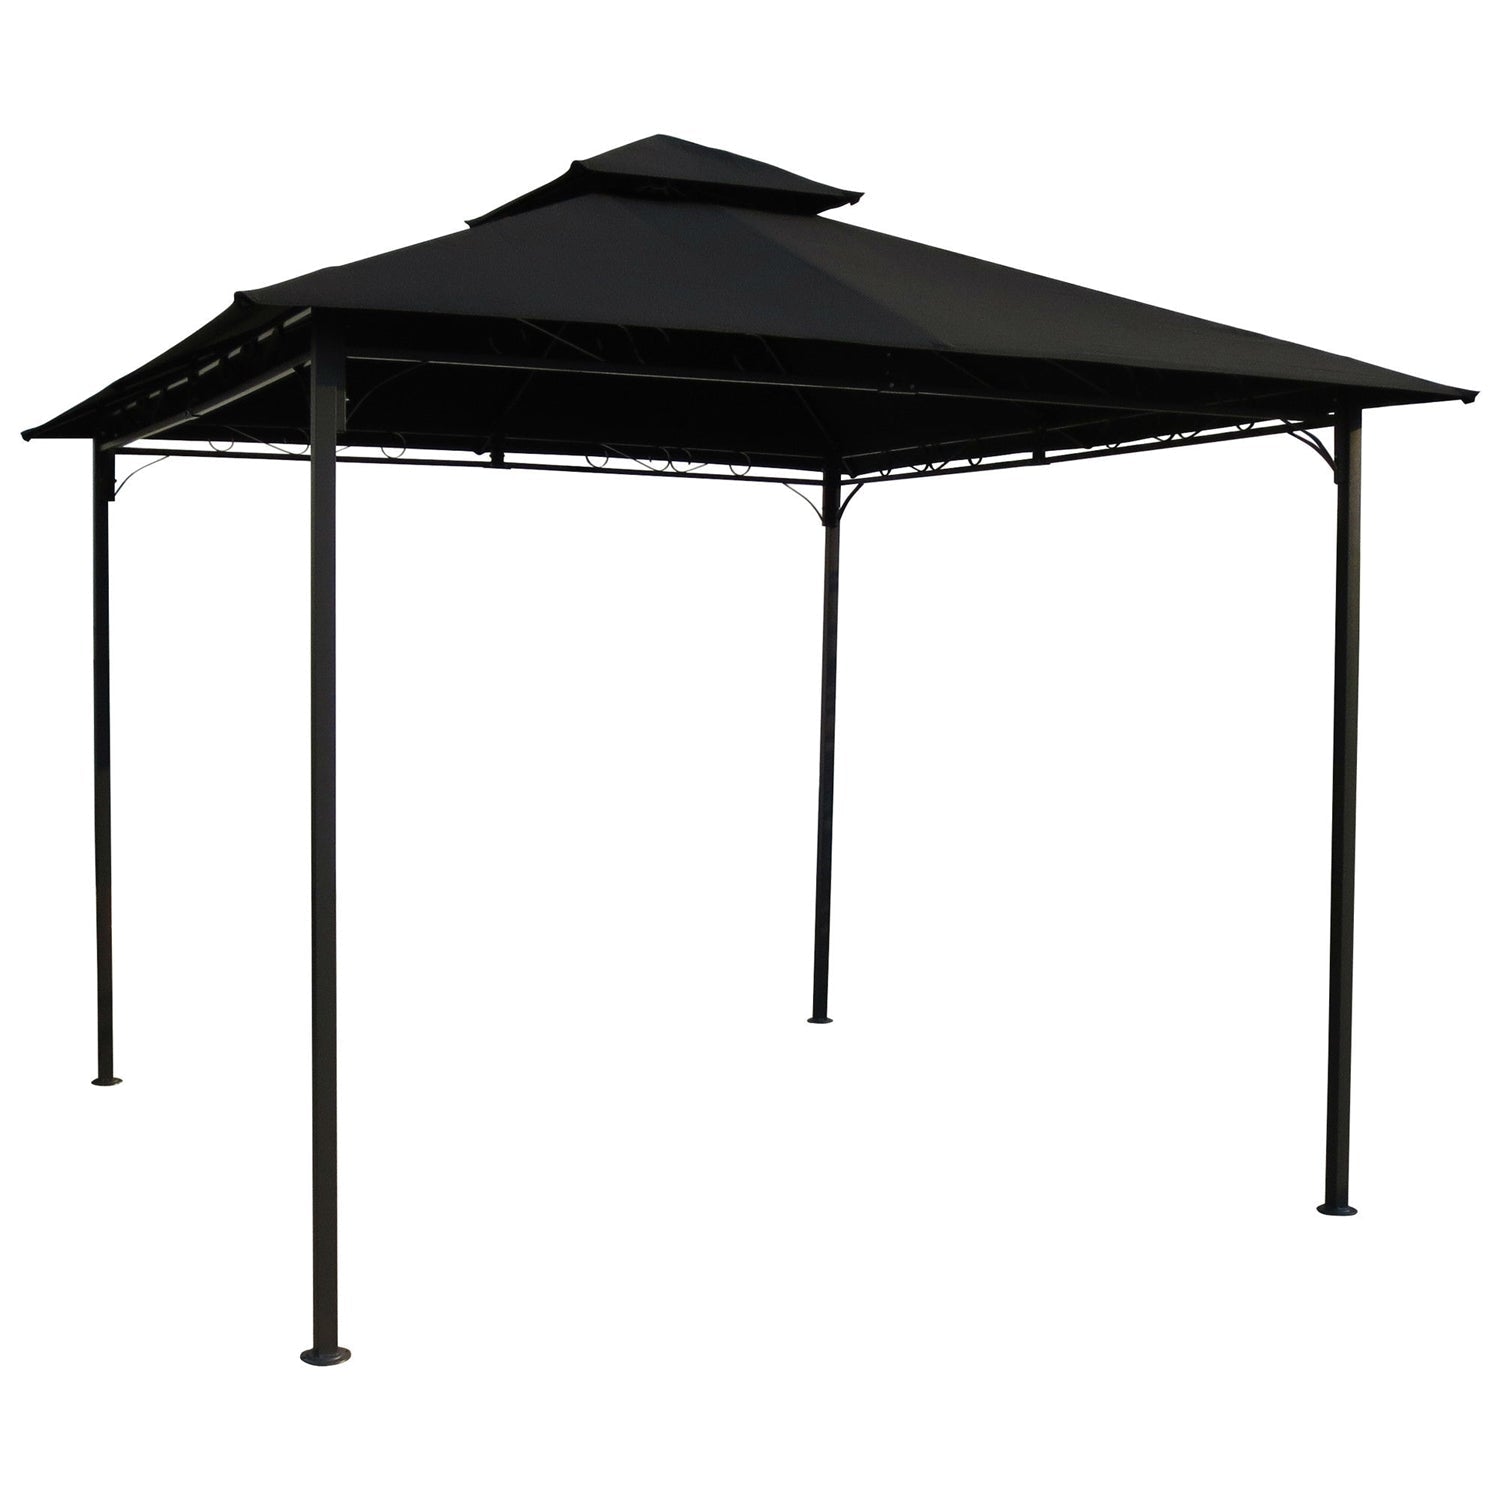 Outdoor > Gazebos & Canopies - 10-Ft X 10-Ft Outdoor Gazebo With Black Weather Resistant Fabric Canopy